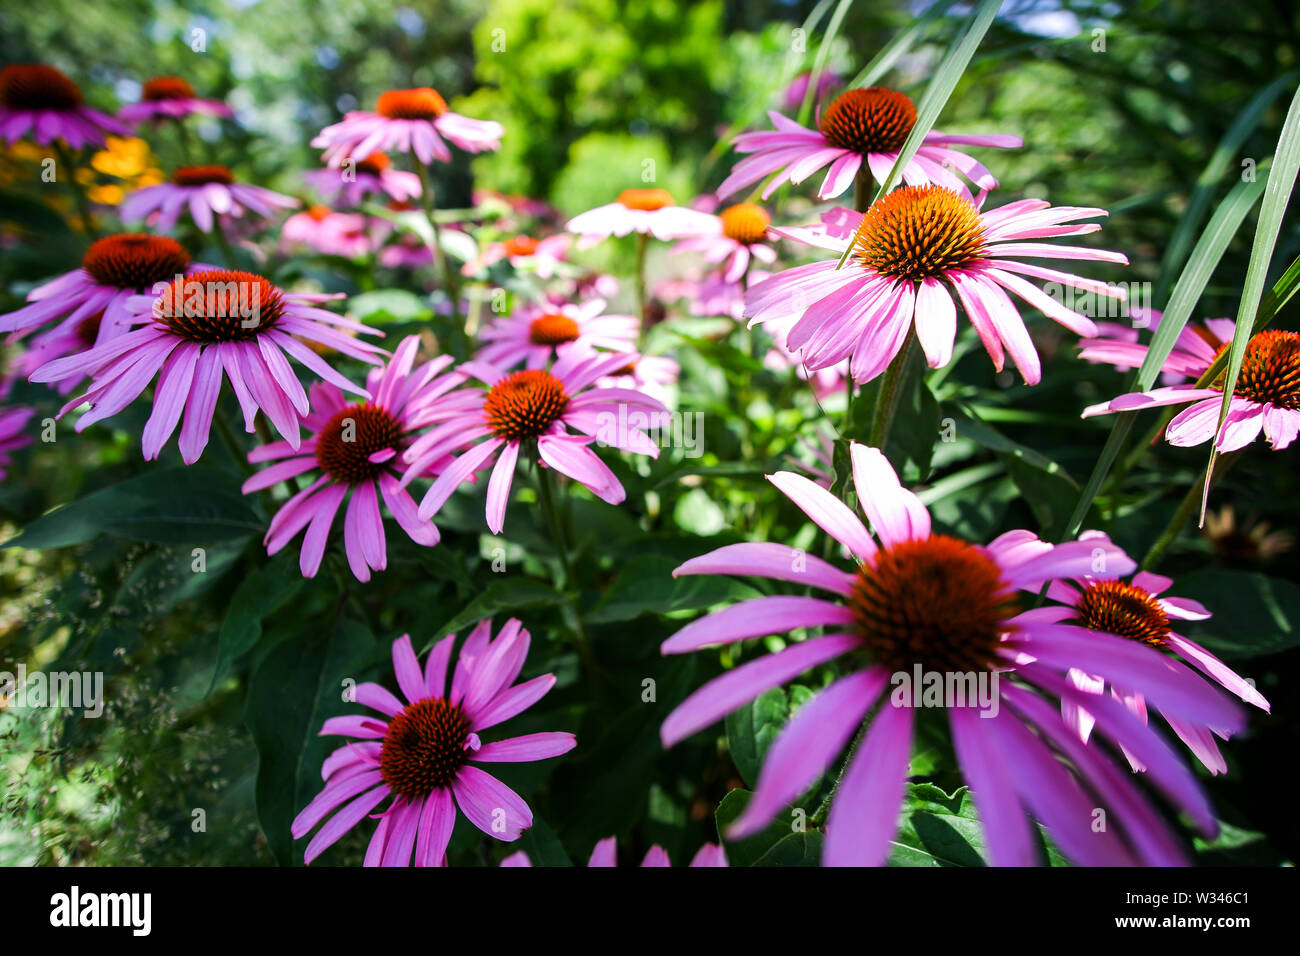 Echinacea Cheyenne Spirit High Resolution Stock Photography And Images Alamy